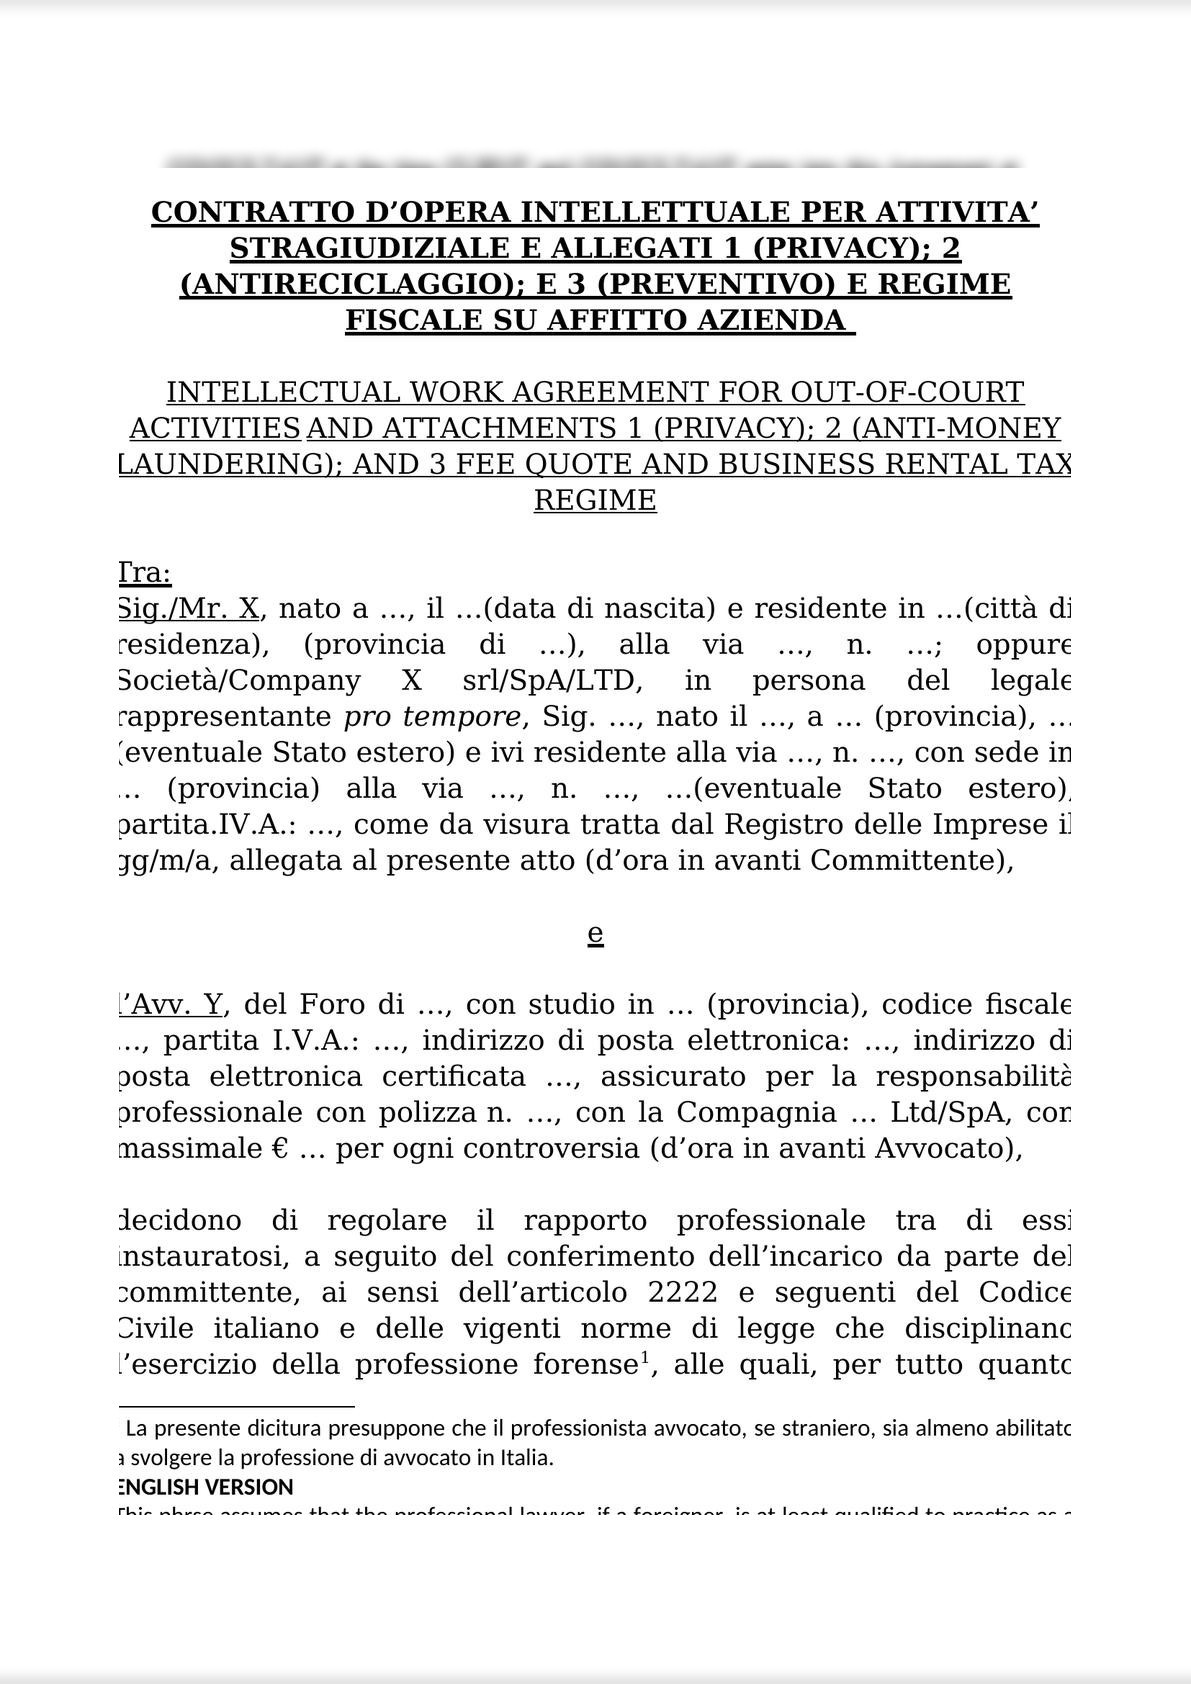 INTELLECTUAL WORK AGREEMENT FOR OUT-OF-COURT ACTIVITIES AND ATTACHMENTS 1 (PRIVACY); 2 (ANTI-MONEY LAUNDERING); AND 3 FEE QUOTE / CONTRATTO D’OPERA INTELLETTUALE STRAGIUDIZIALE-0